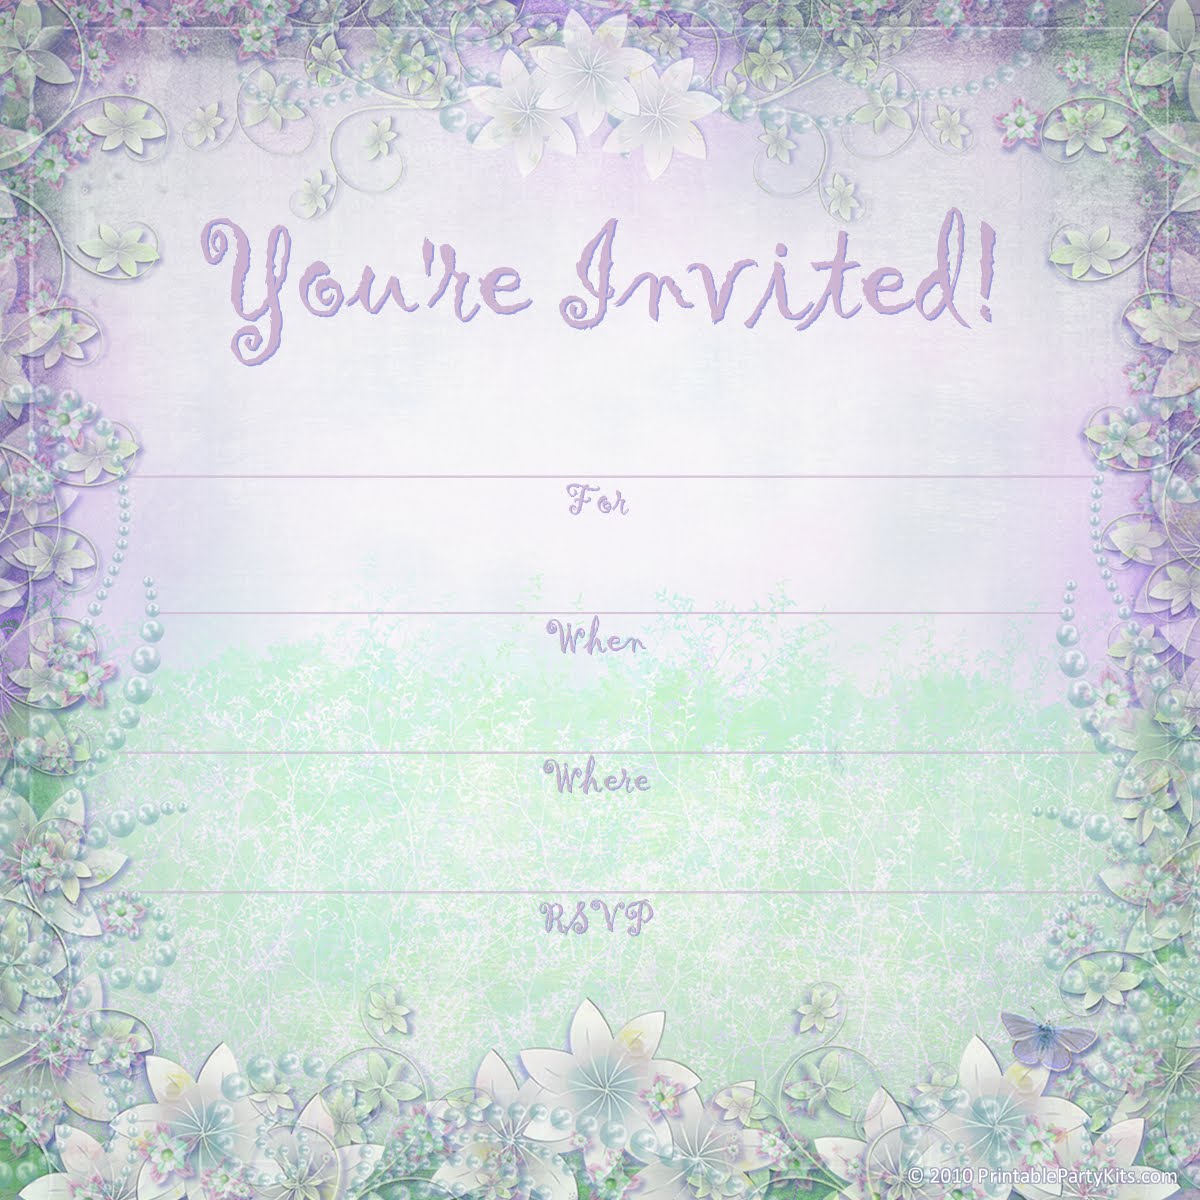 free blue and silver wedding invitations templates